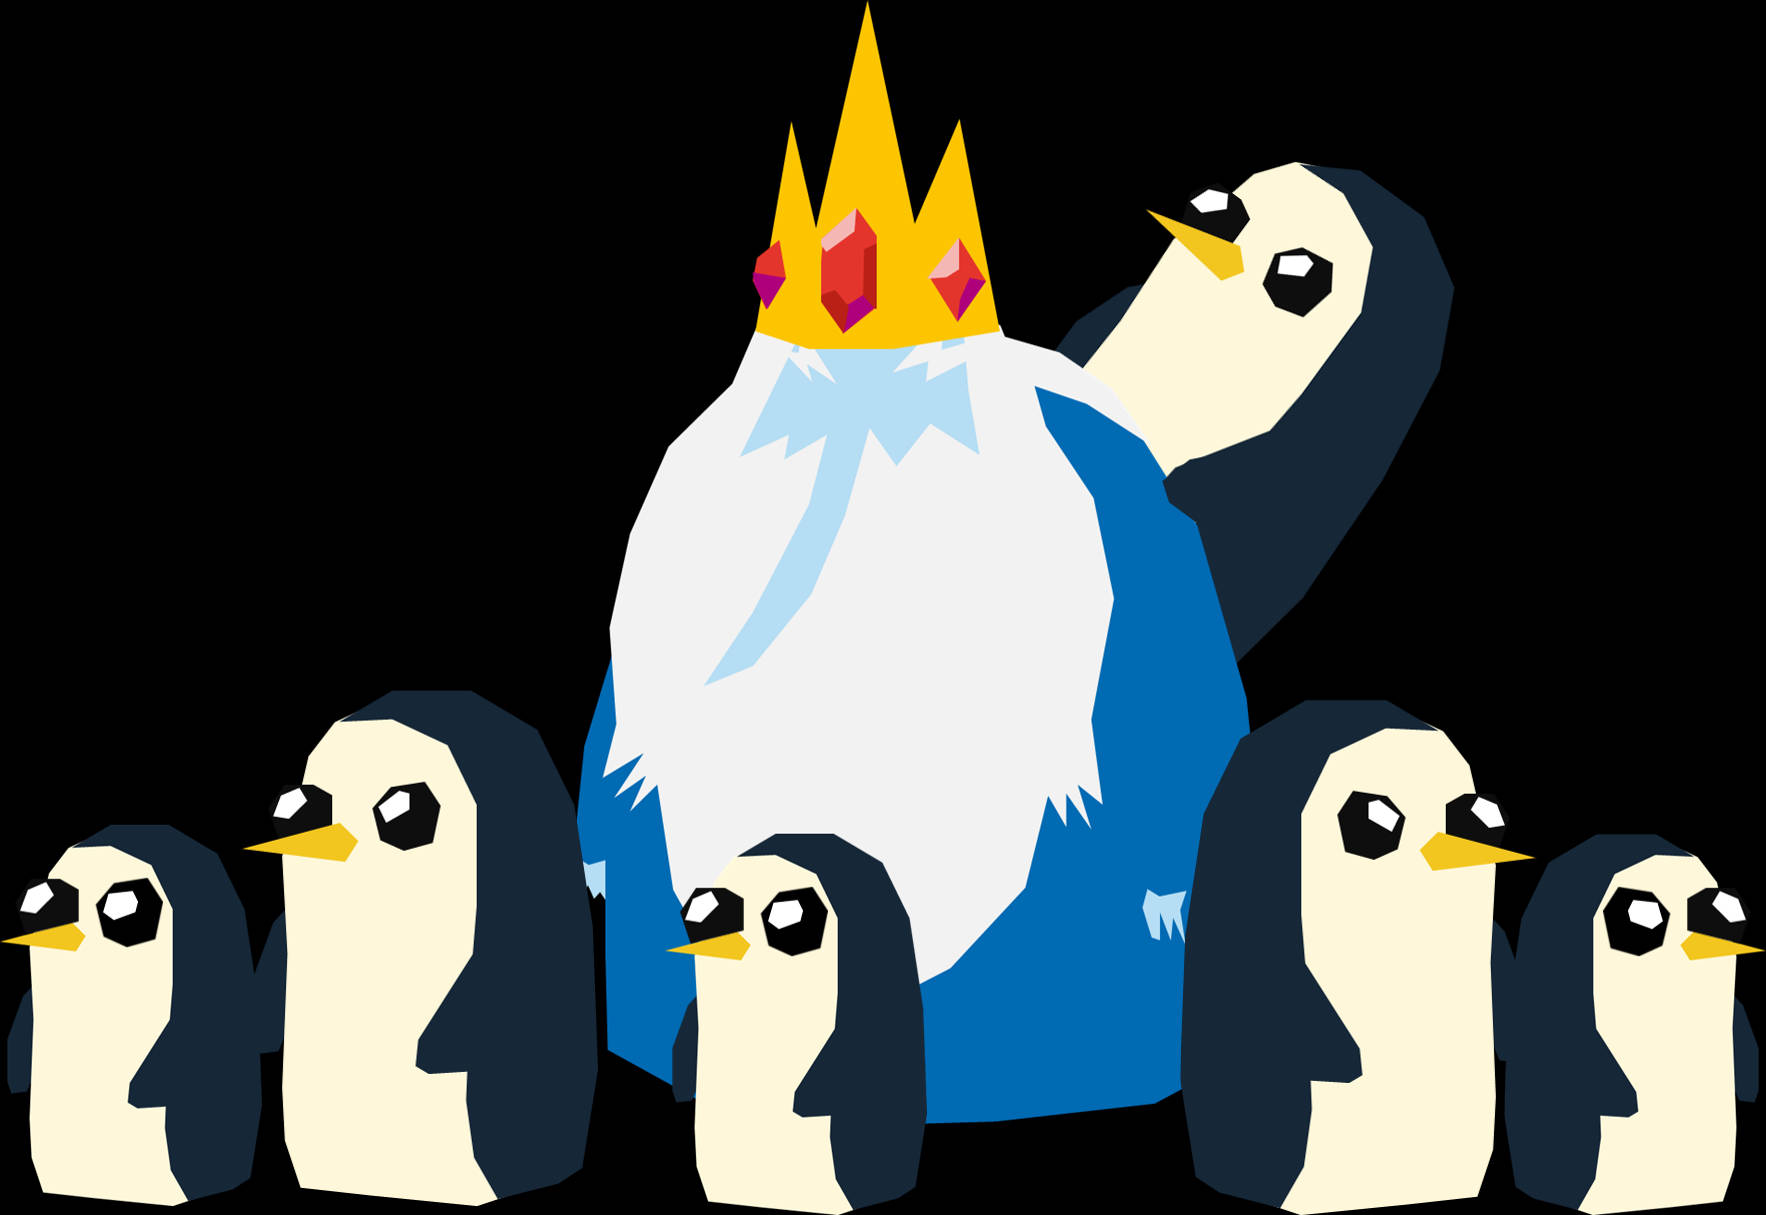 Caption: Gunter - The Adorable Trouble-maker From Adventure Time Wallpaper